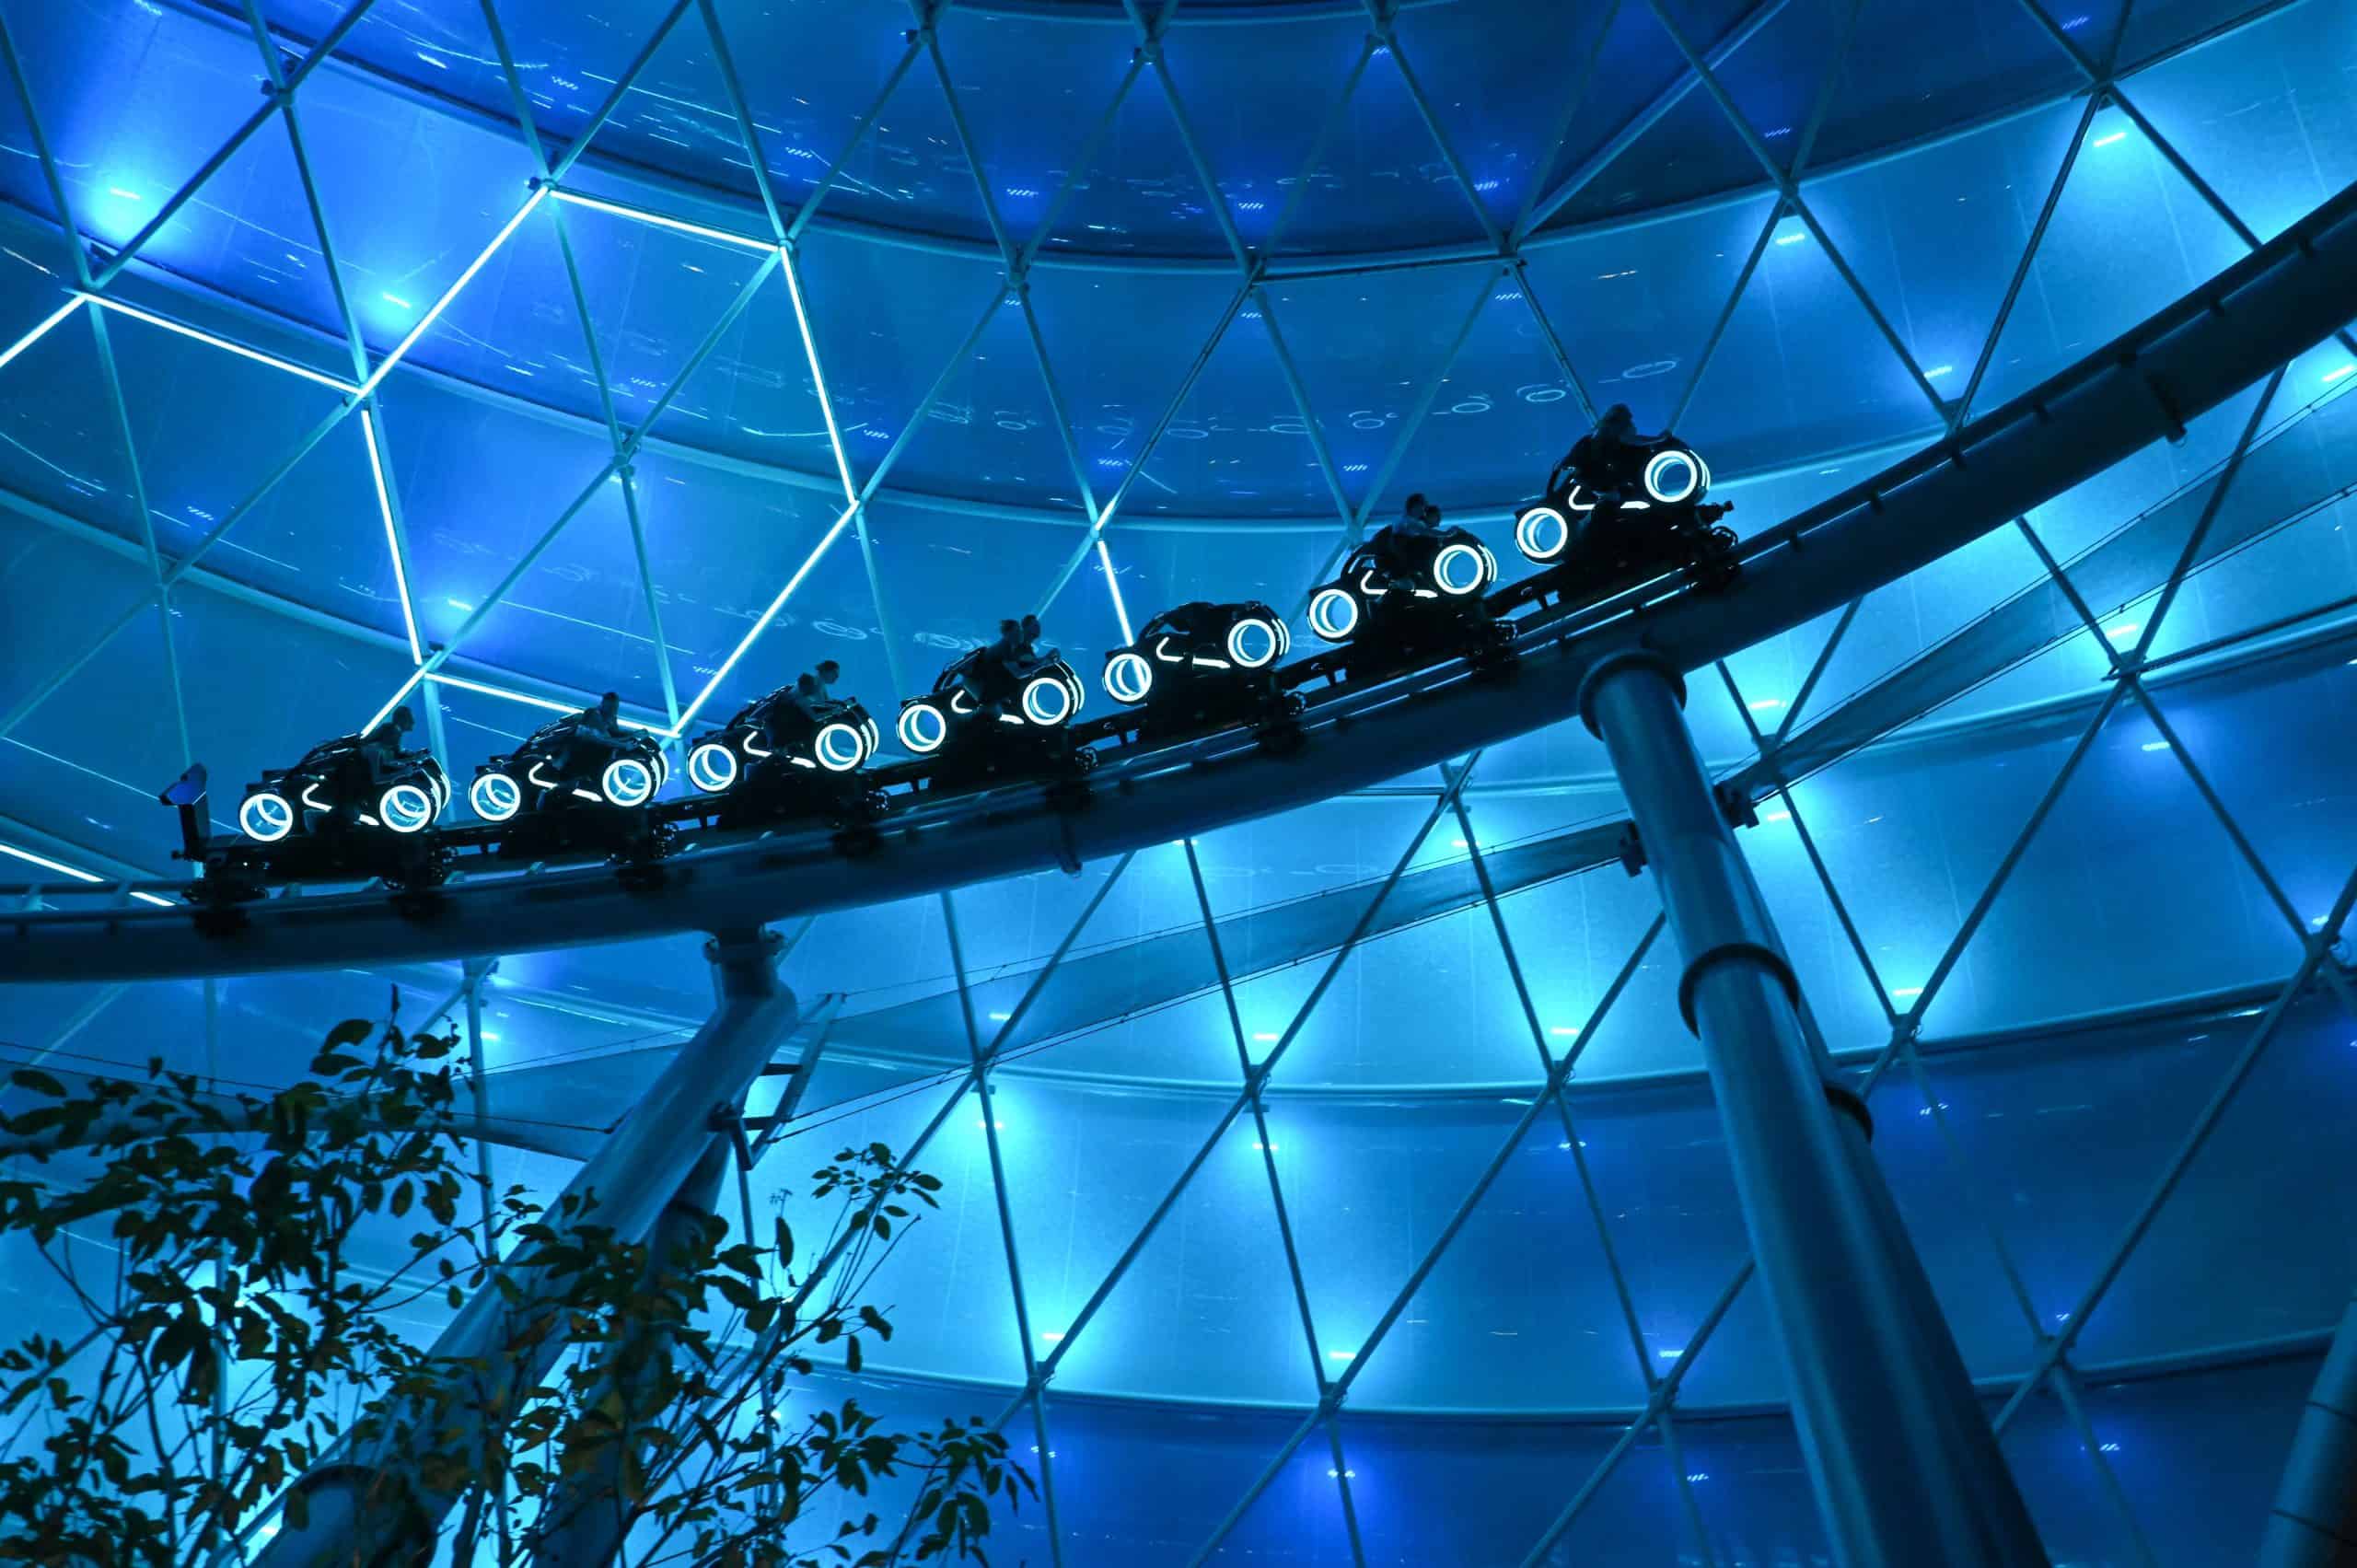 <p>There aren't other attractions quite as special and unique as Tron Lightcycle Run, which is located at Disney World. The newly opened ride is full of stunning visuals that will keep you locked in from start to finish. The ride itself is based on a sci-fi film from Disney Studios called "Tron: Legacy."</p> <p>As a reminder, the epic sci-fi action movie hit theaters in 2010. With a cast lineup including Jeff Bridges and Olivia Wilde, it's not surprising that the movie did so well among audiences. Throughout the ride, you'll feel like you're on a high speed race track. It will undoubtedly make you feel like a true adventurer.</p>